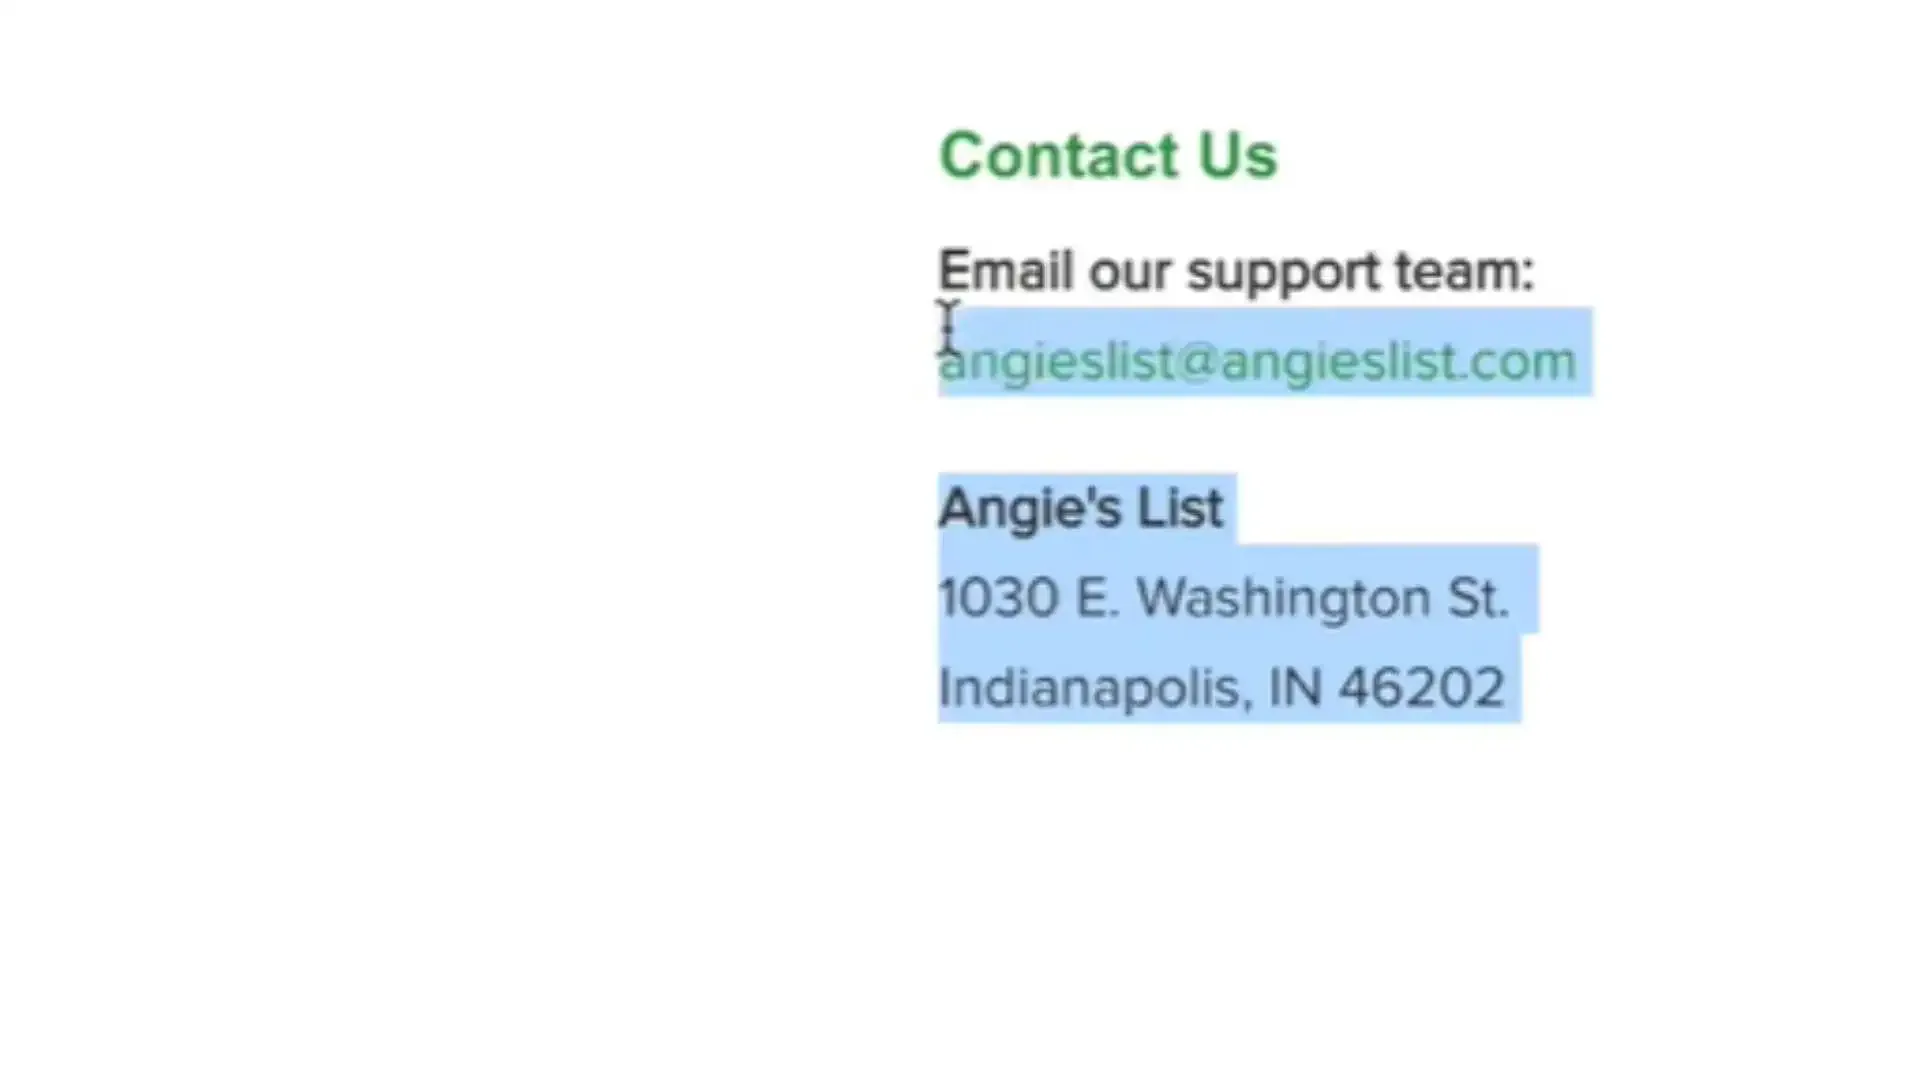 Email Angie's List